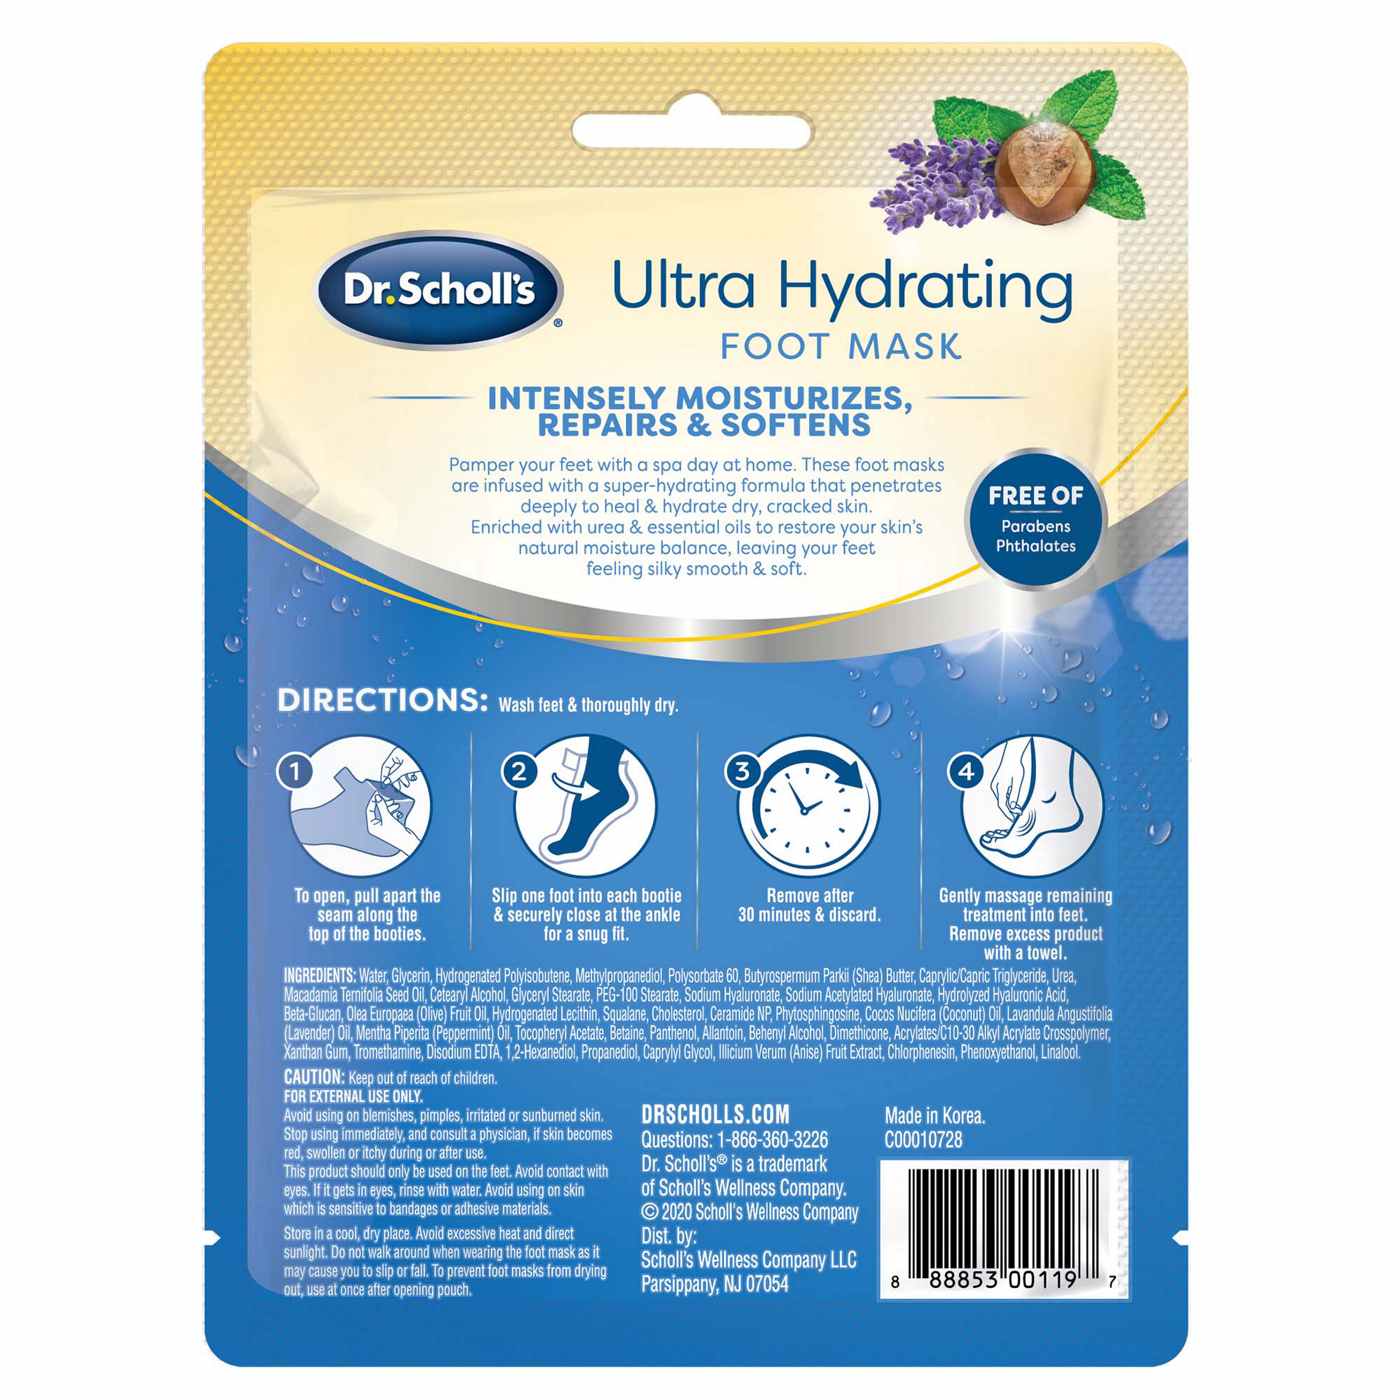 Dr. Scholl's Ultra Hydrating Foot Mask; image 2 of 2